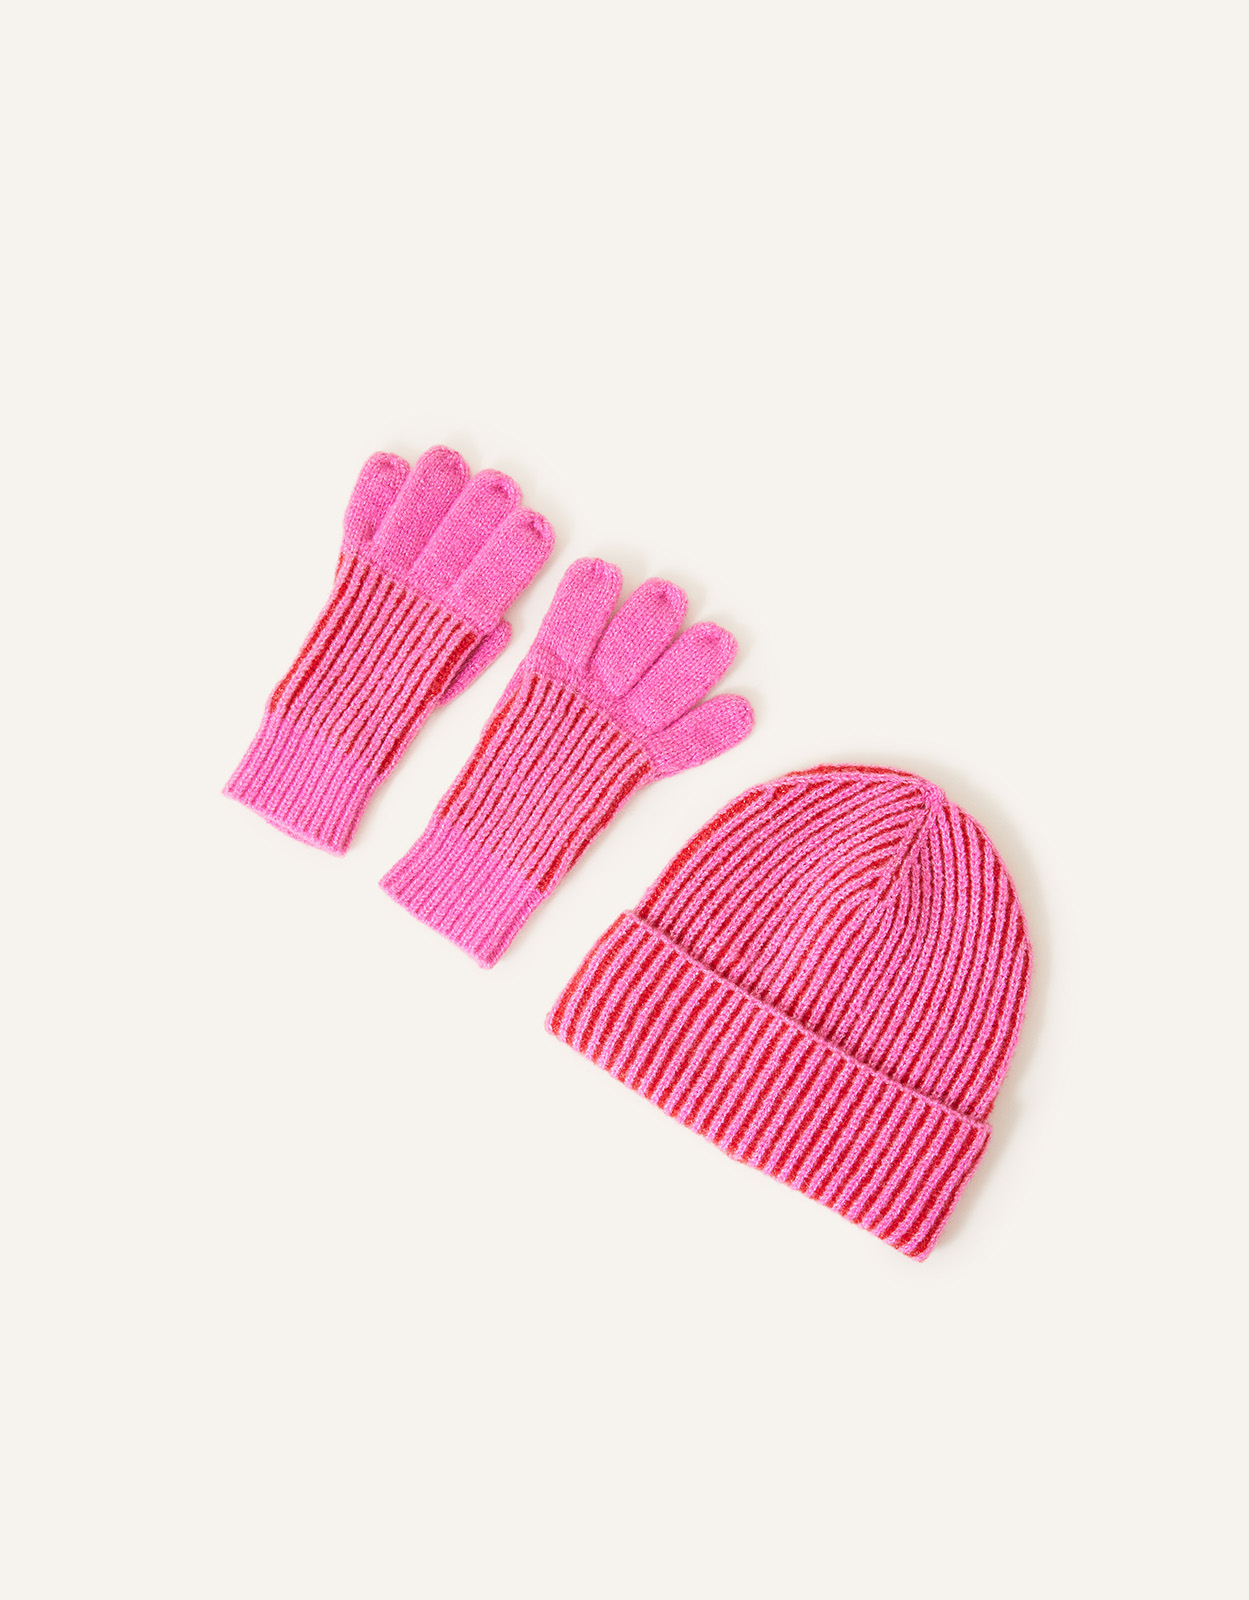 Accessorize Girl's Girls Hat and Gloves Set Pink, Size: 6-8 yrs